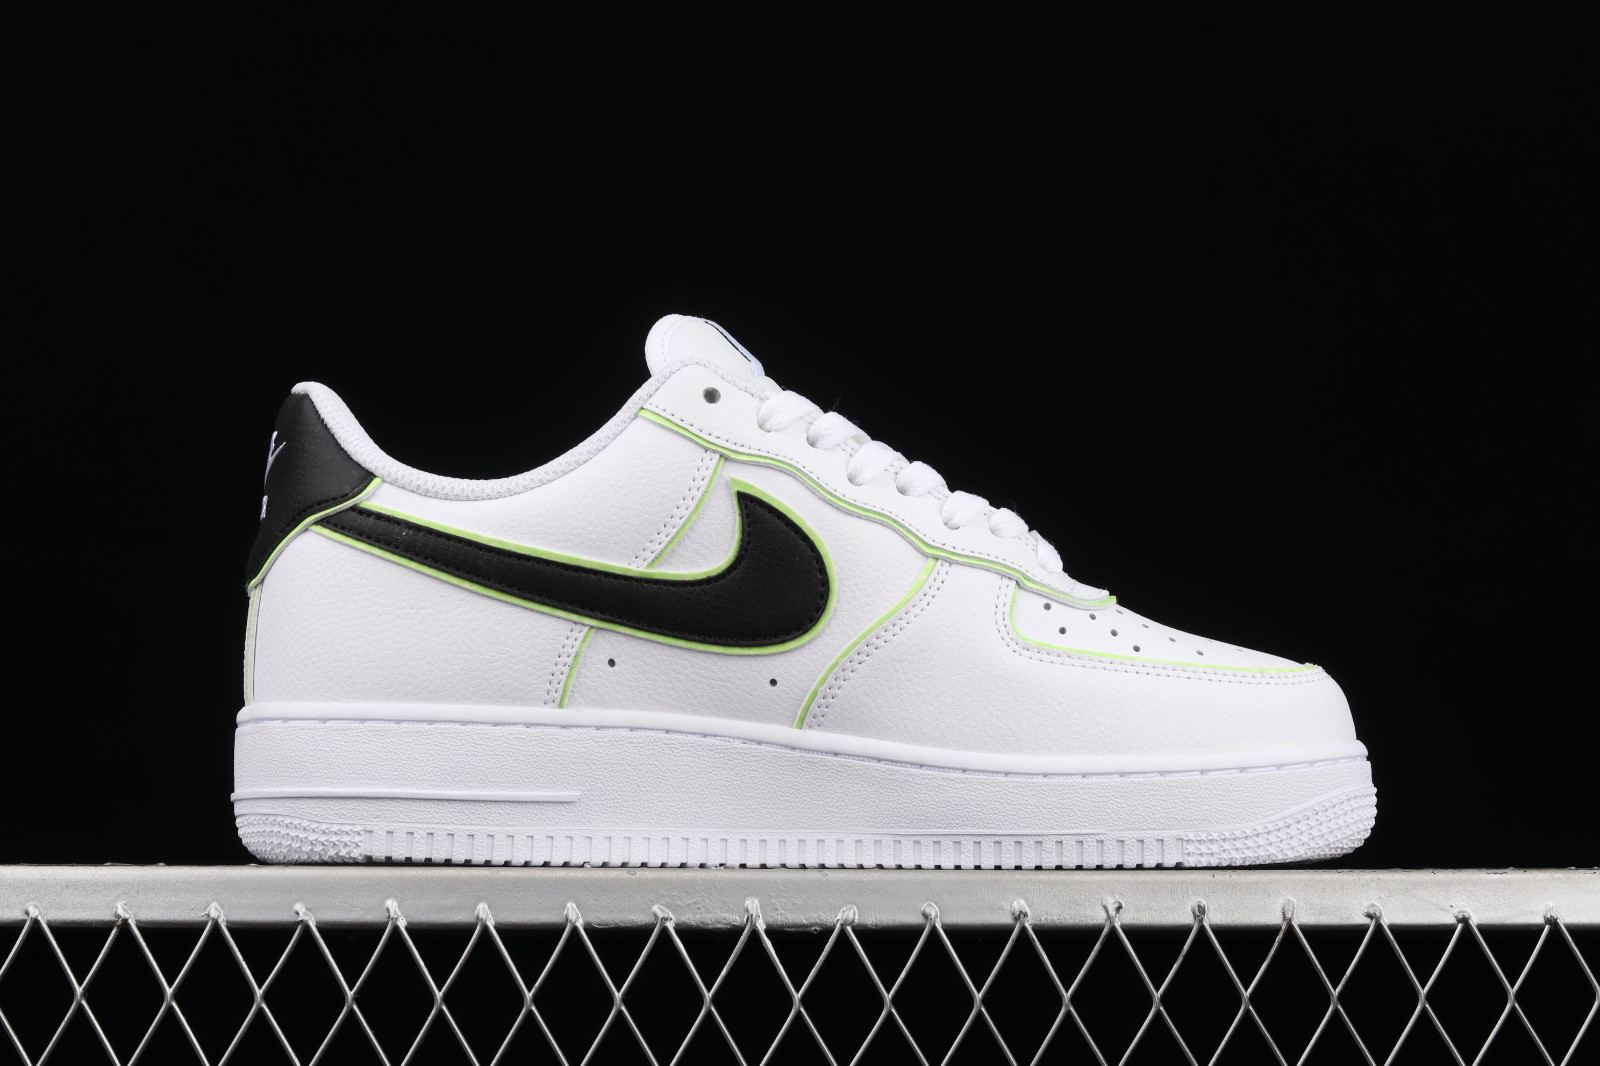 Air Force 1 07 Low White Black Green Shoes CW2288 nike lebron james sneaker 2015 release schedule - GmarShops - 304